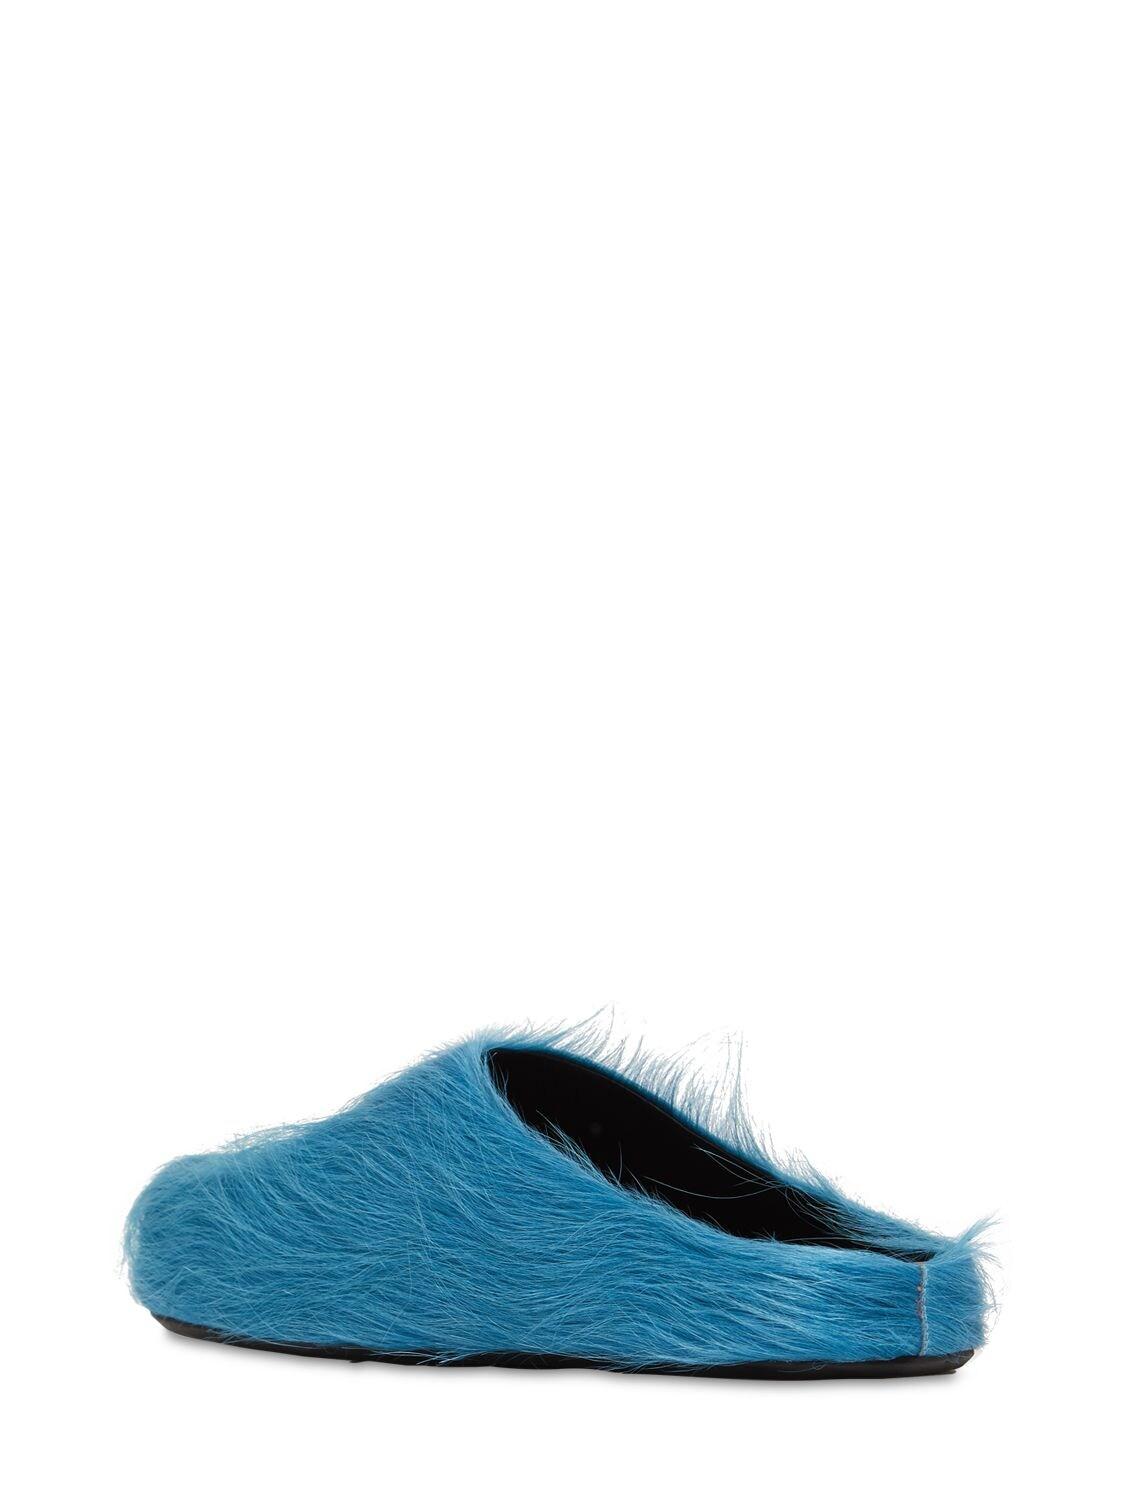 Marni Long Hair Leather Fussbett Sabot Loafers in Blue for Men | Lyst